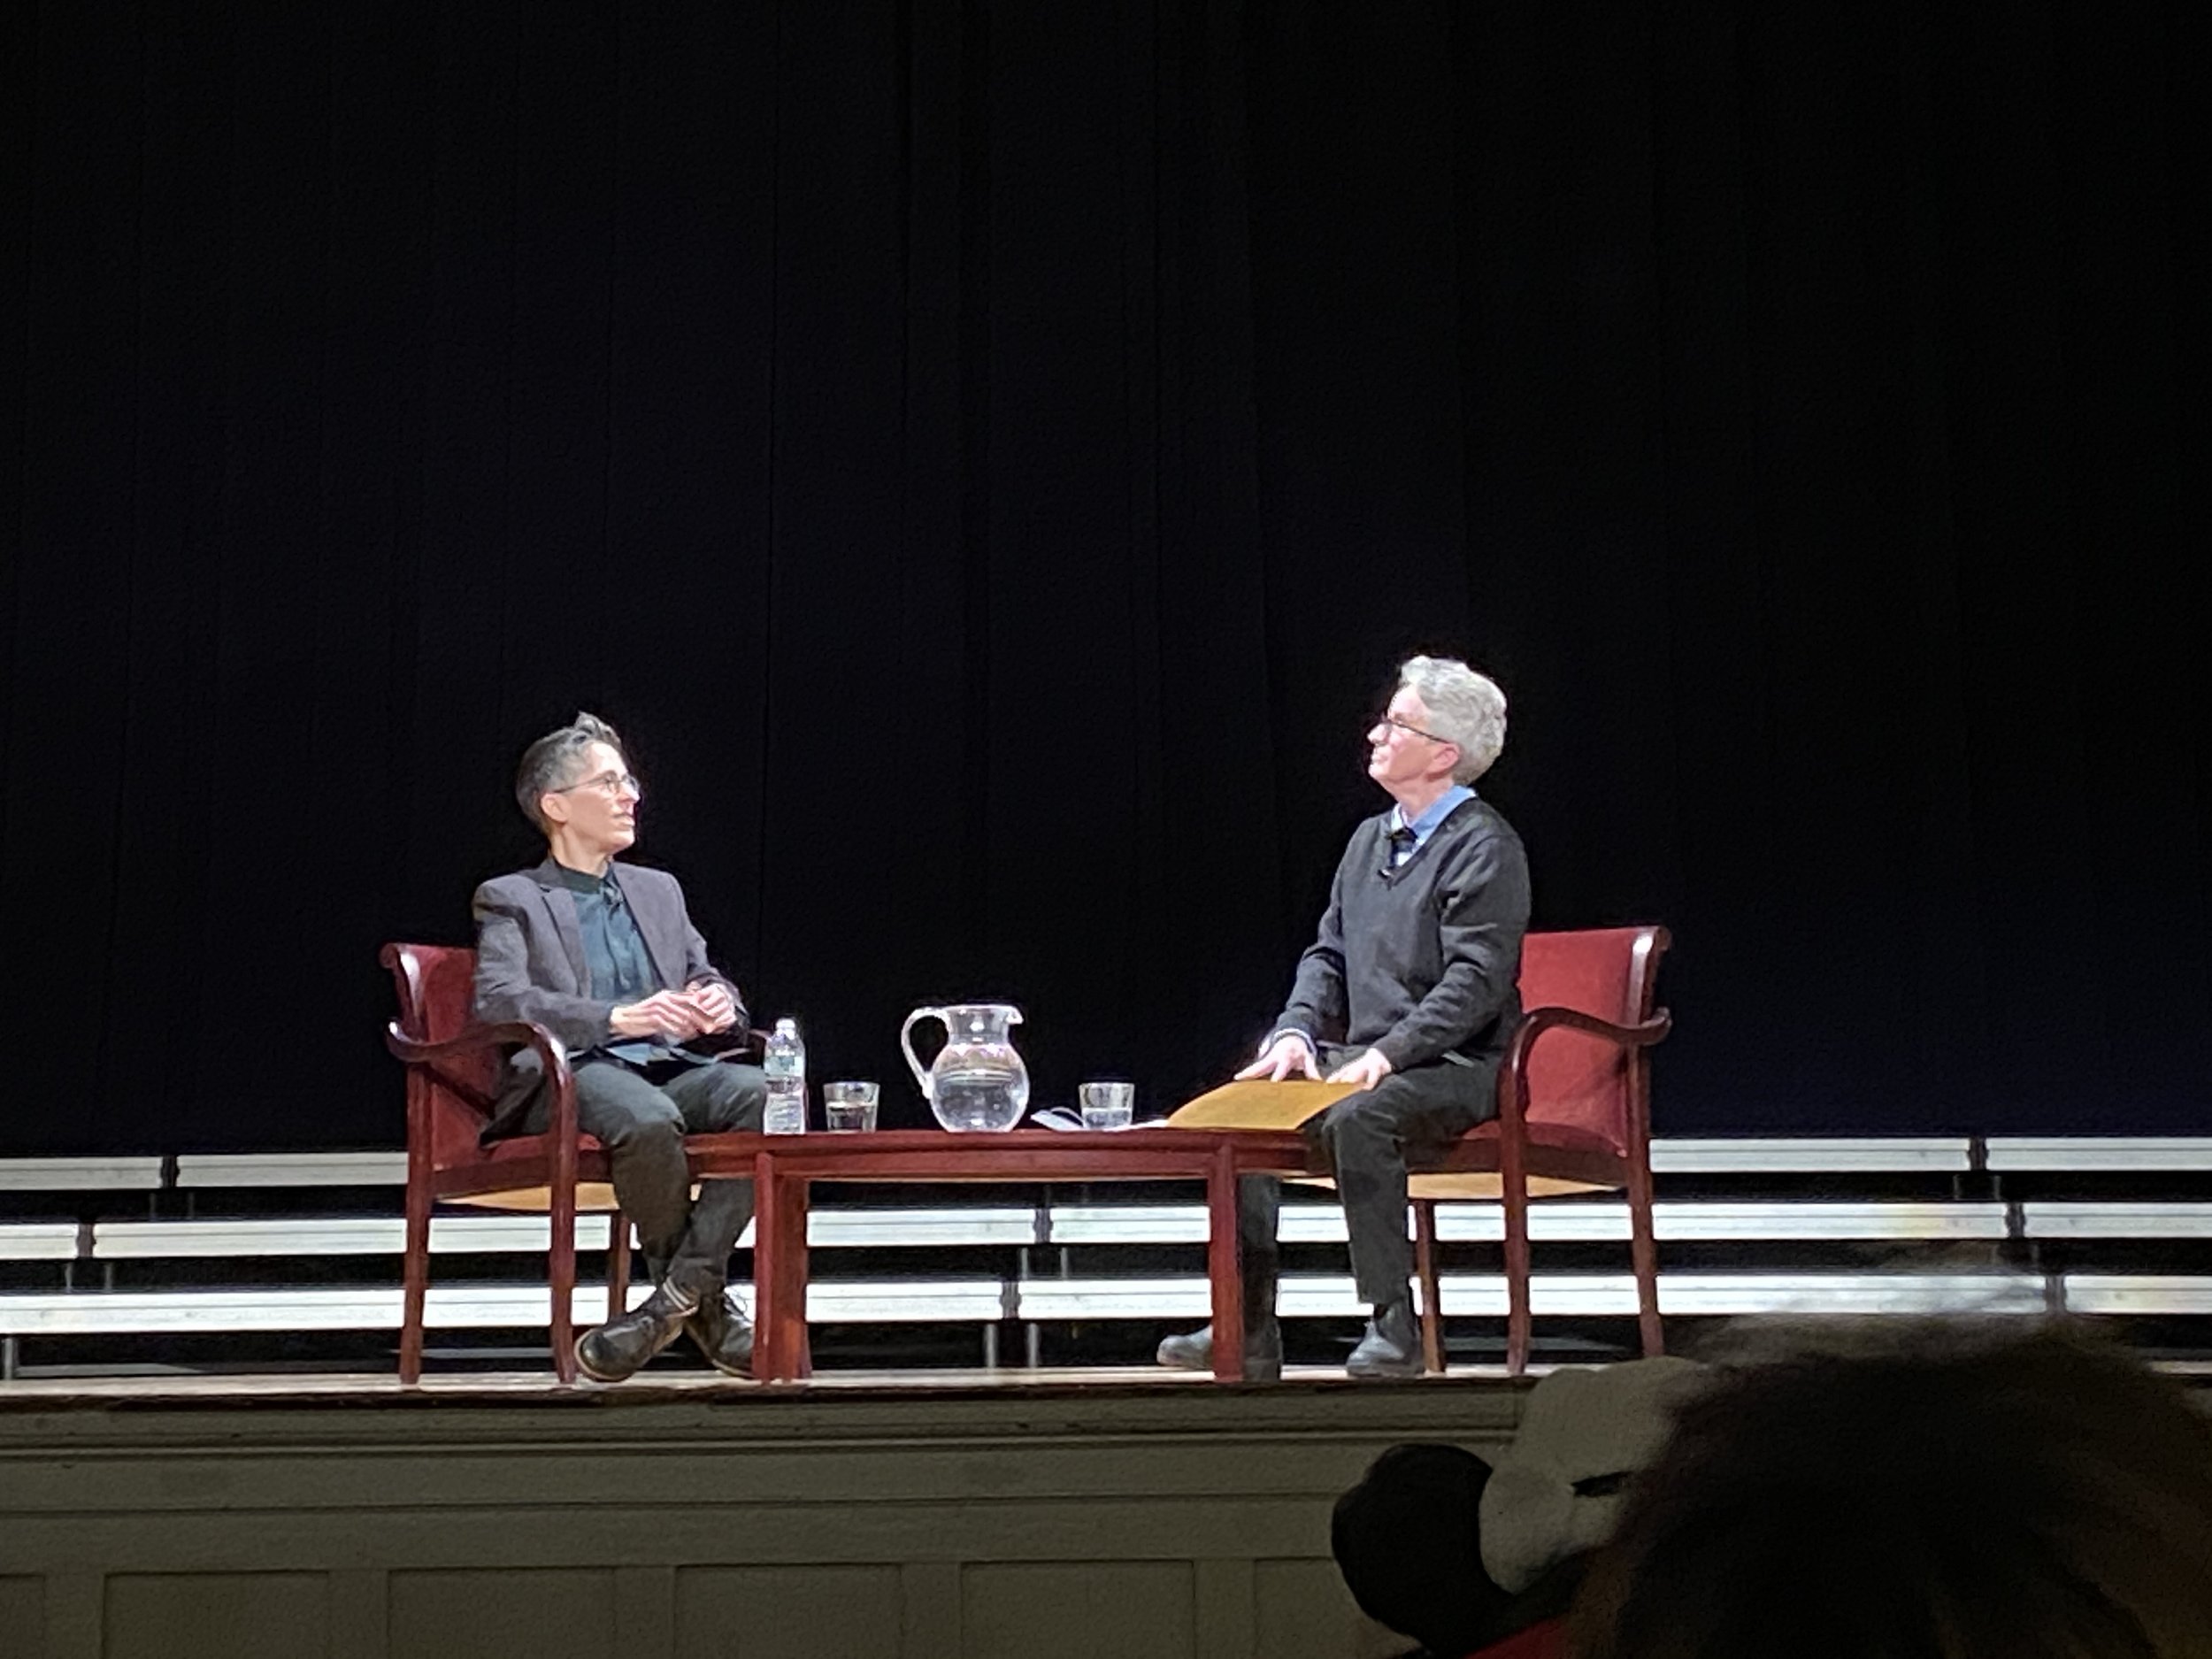  Photo by Emma Quirk ’26 Famous lesbian cartoonist Alison Bechdel spoke at Smith College on March 2. She discussed intertextual references in her work and queer politics. 